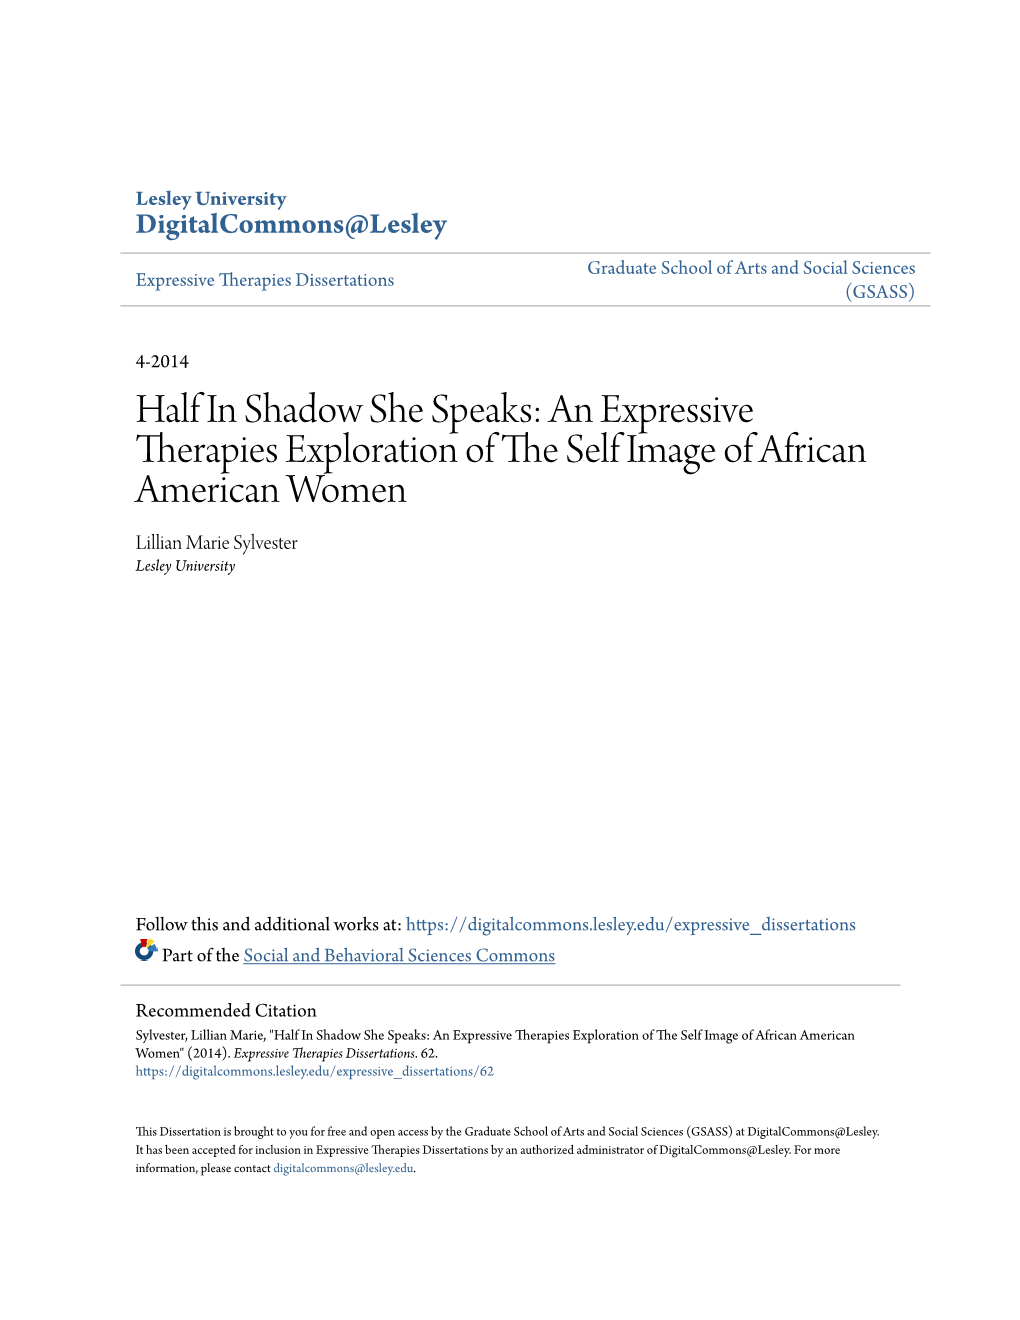 An Expressive Therapies Exploration of the Els F Image of African American Women Lillian Marie Sylvester Lesley University